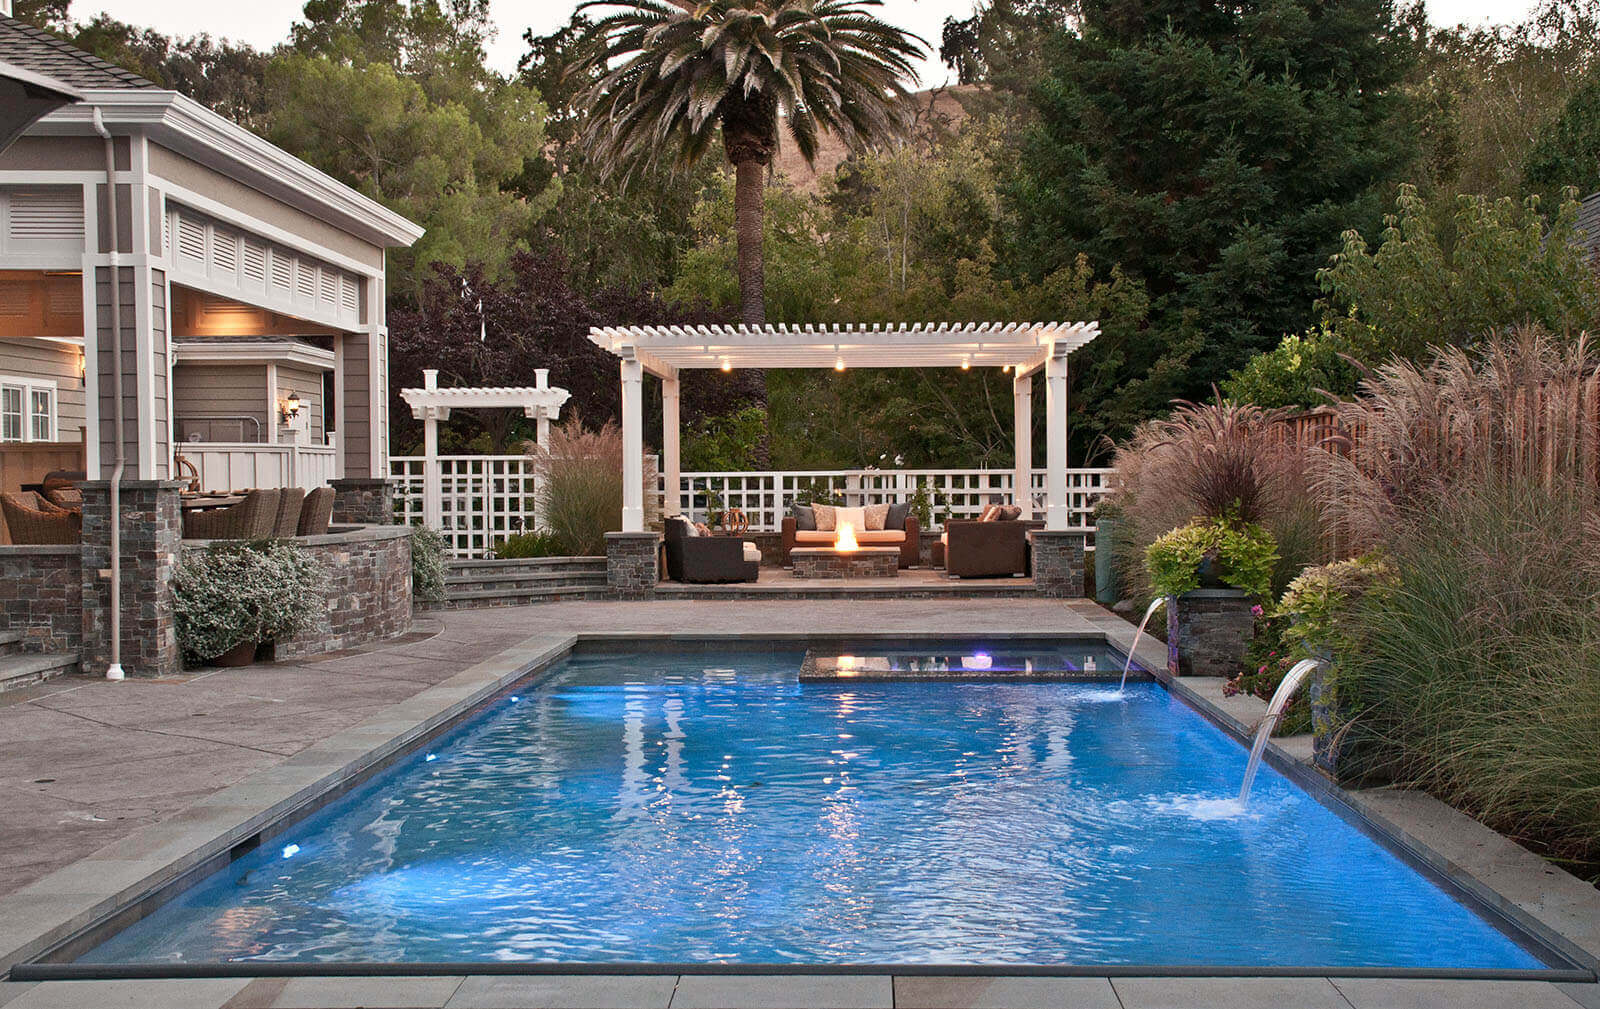 Zero-edge pool with inset spa and sheer descent falls with poolside lounge and planting